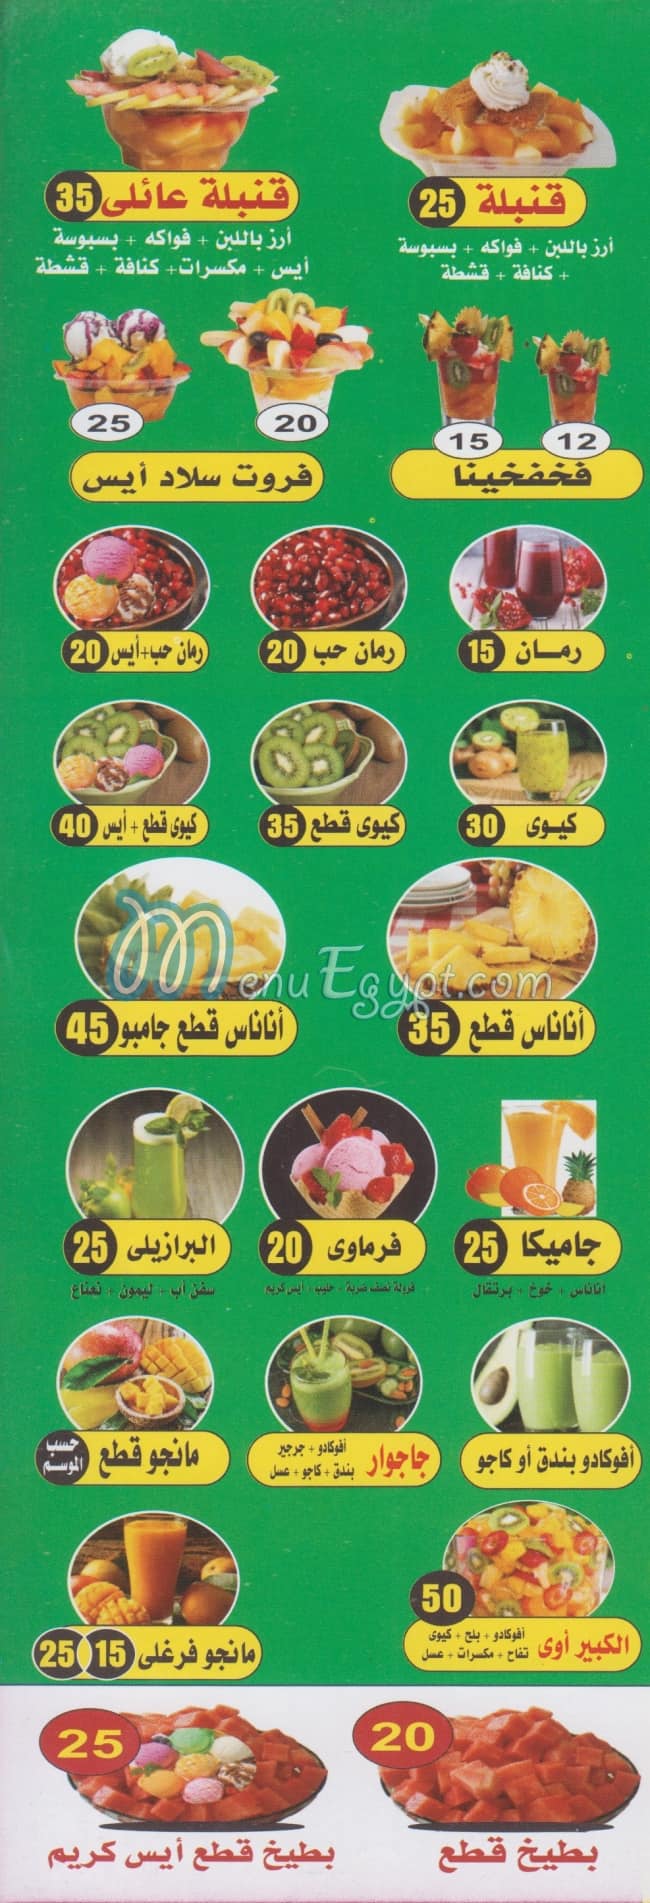 Farghaly Drink delivery menu